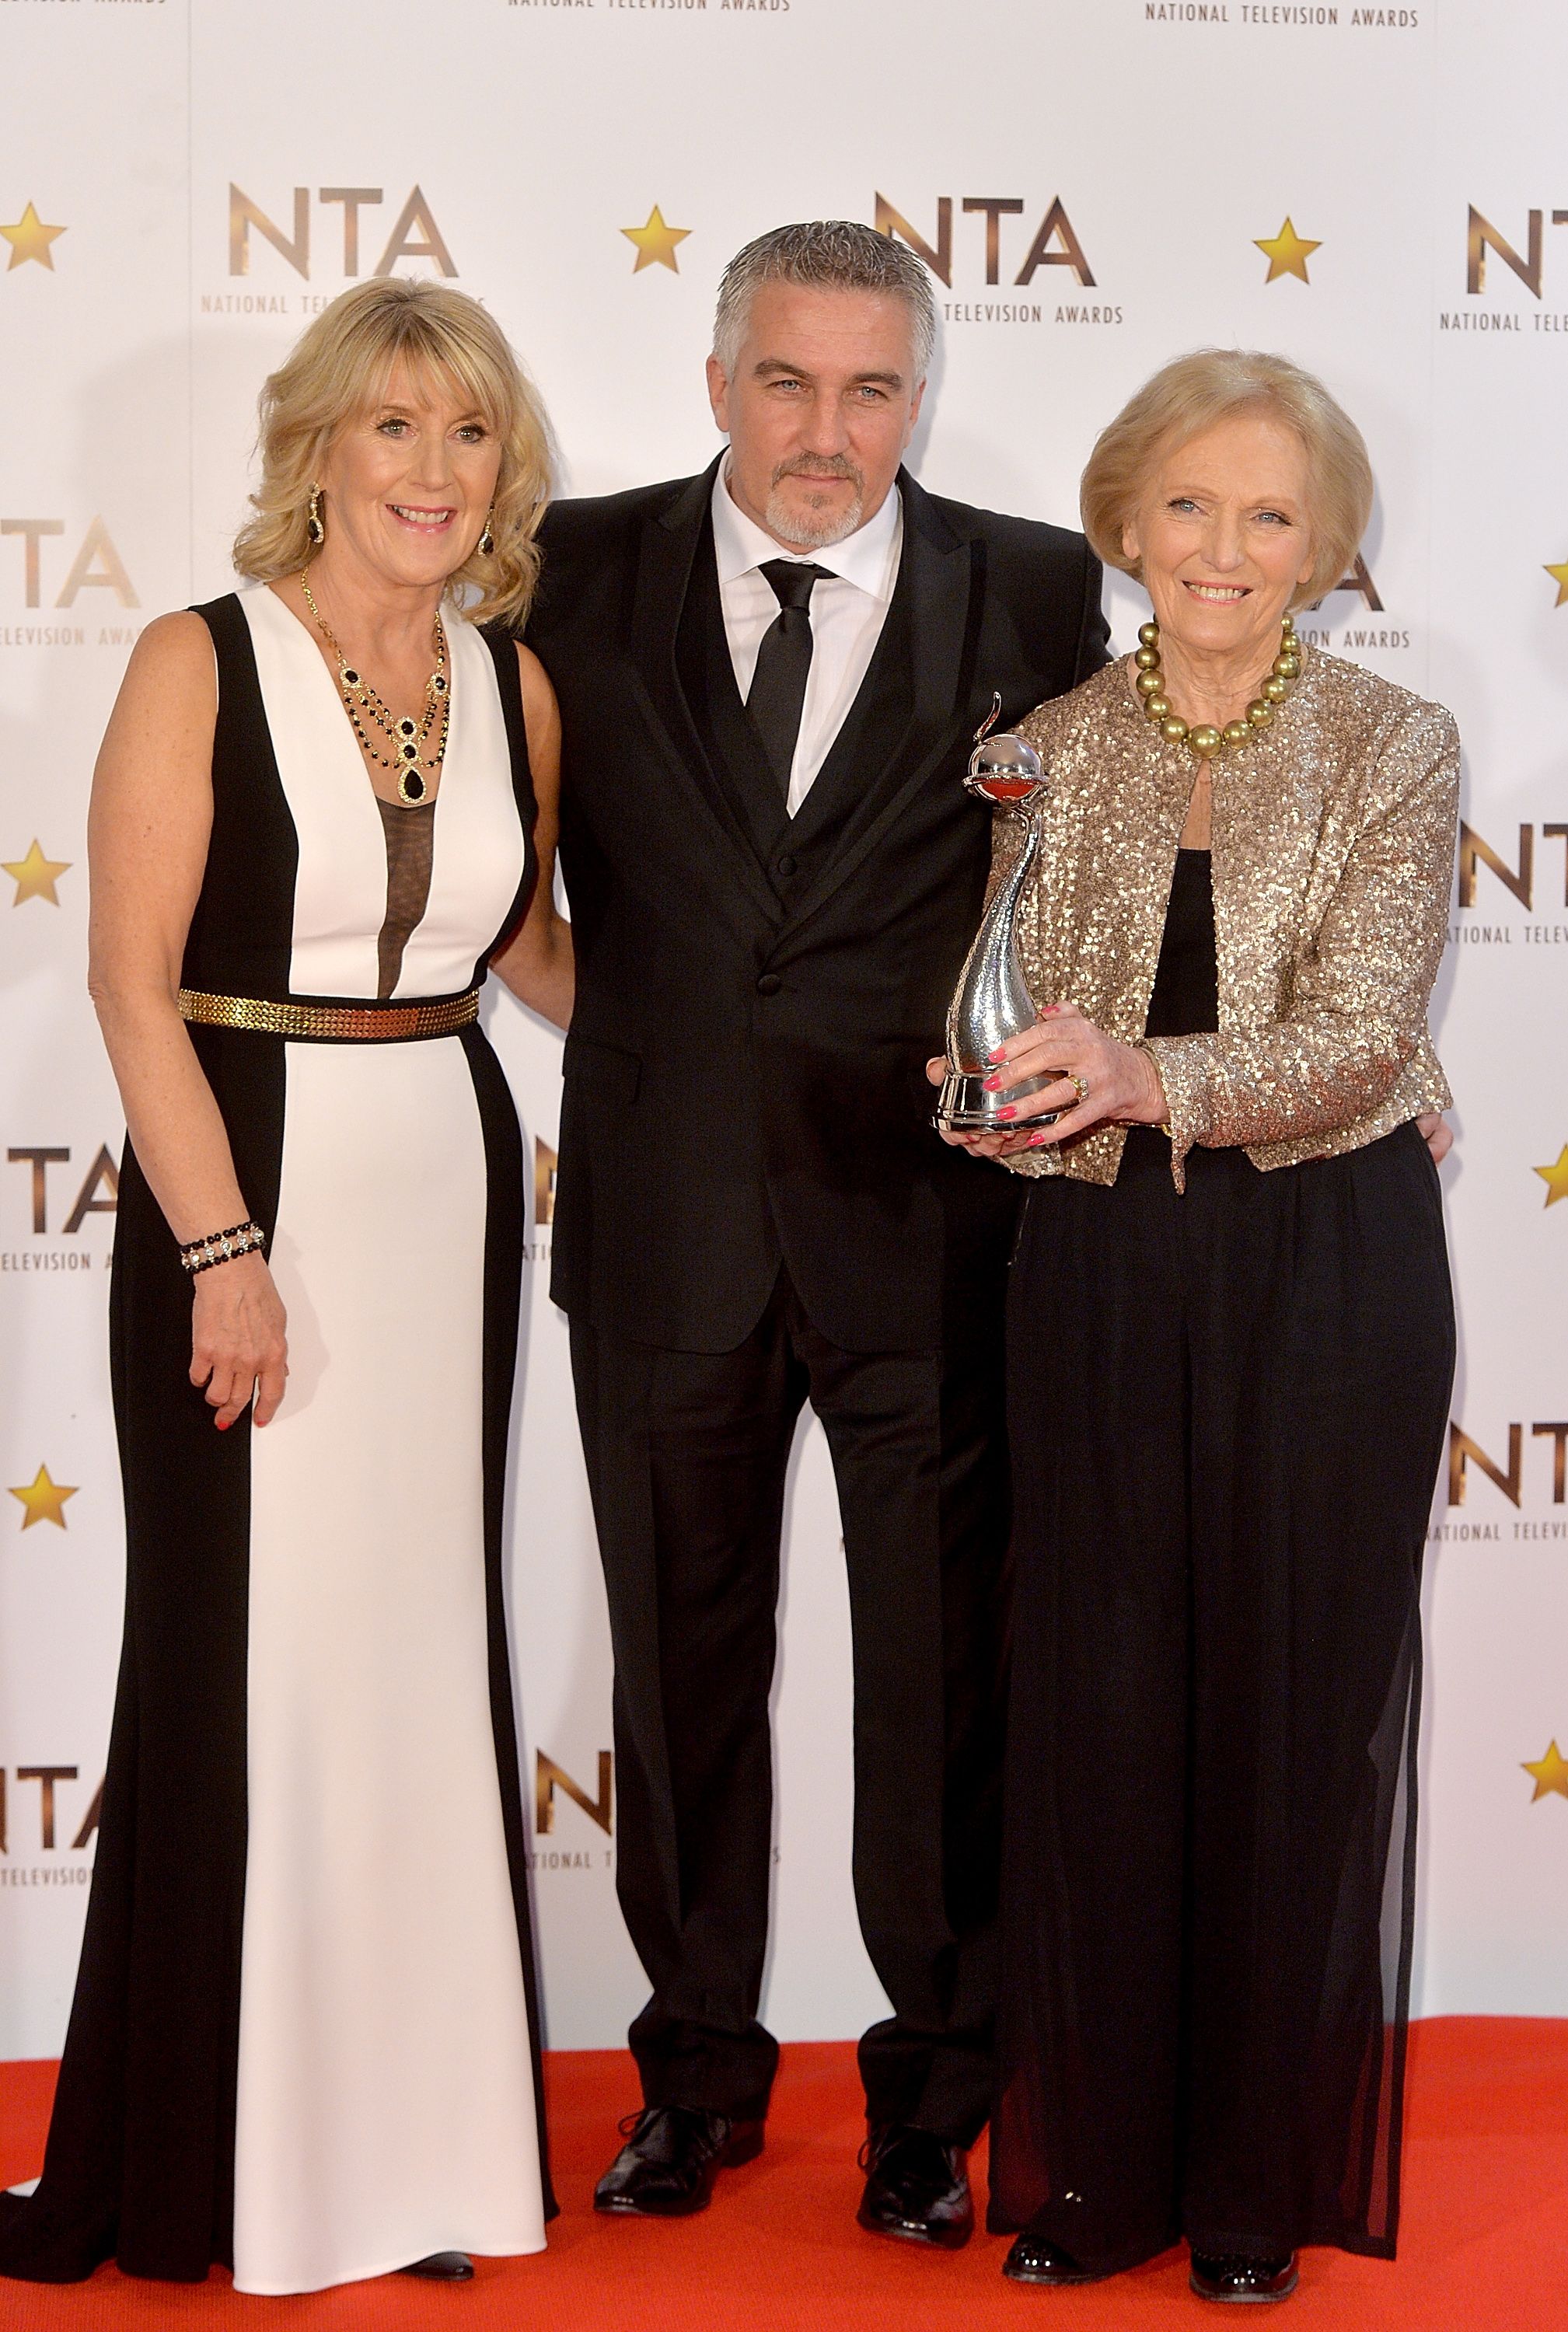 Mary Berry holds award with Paul Hollywood.